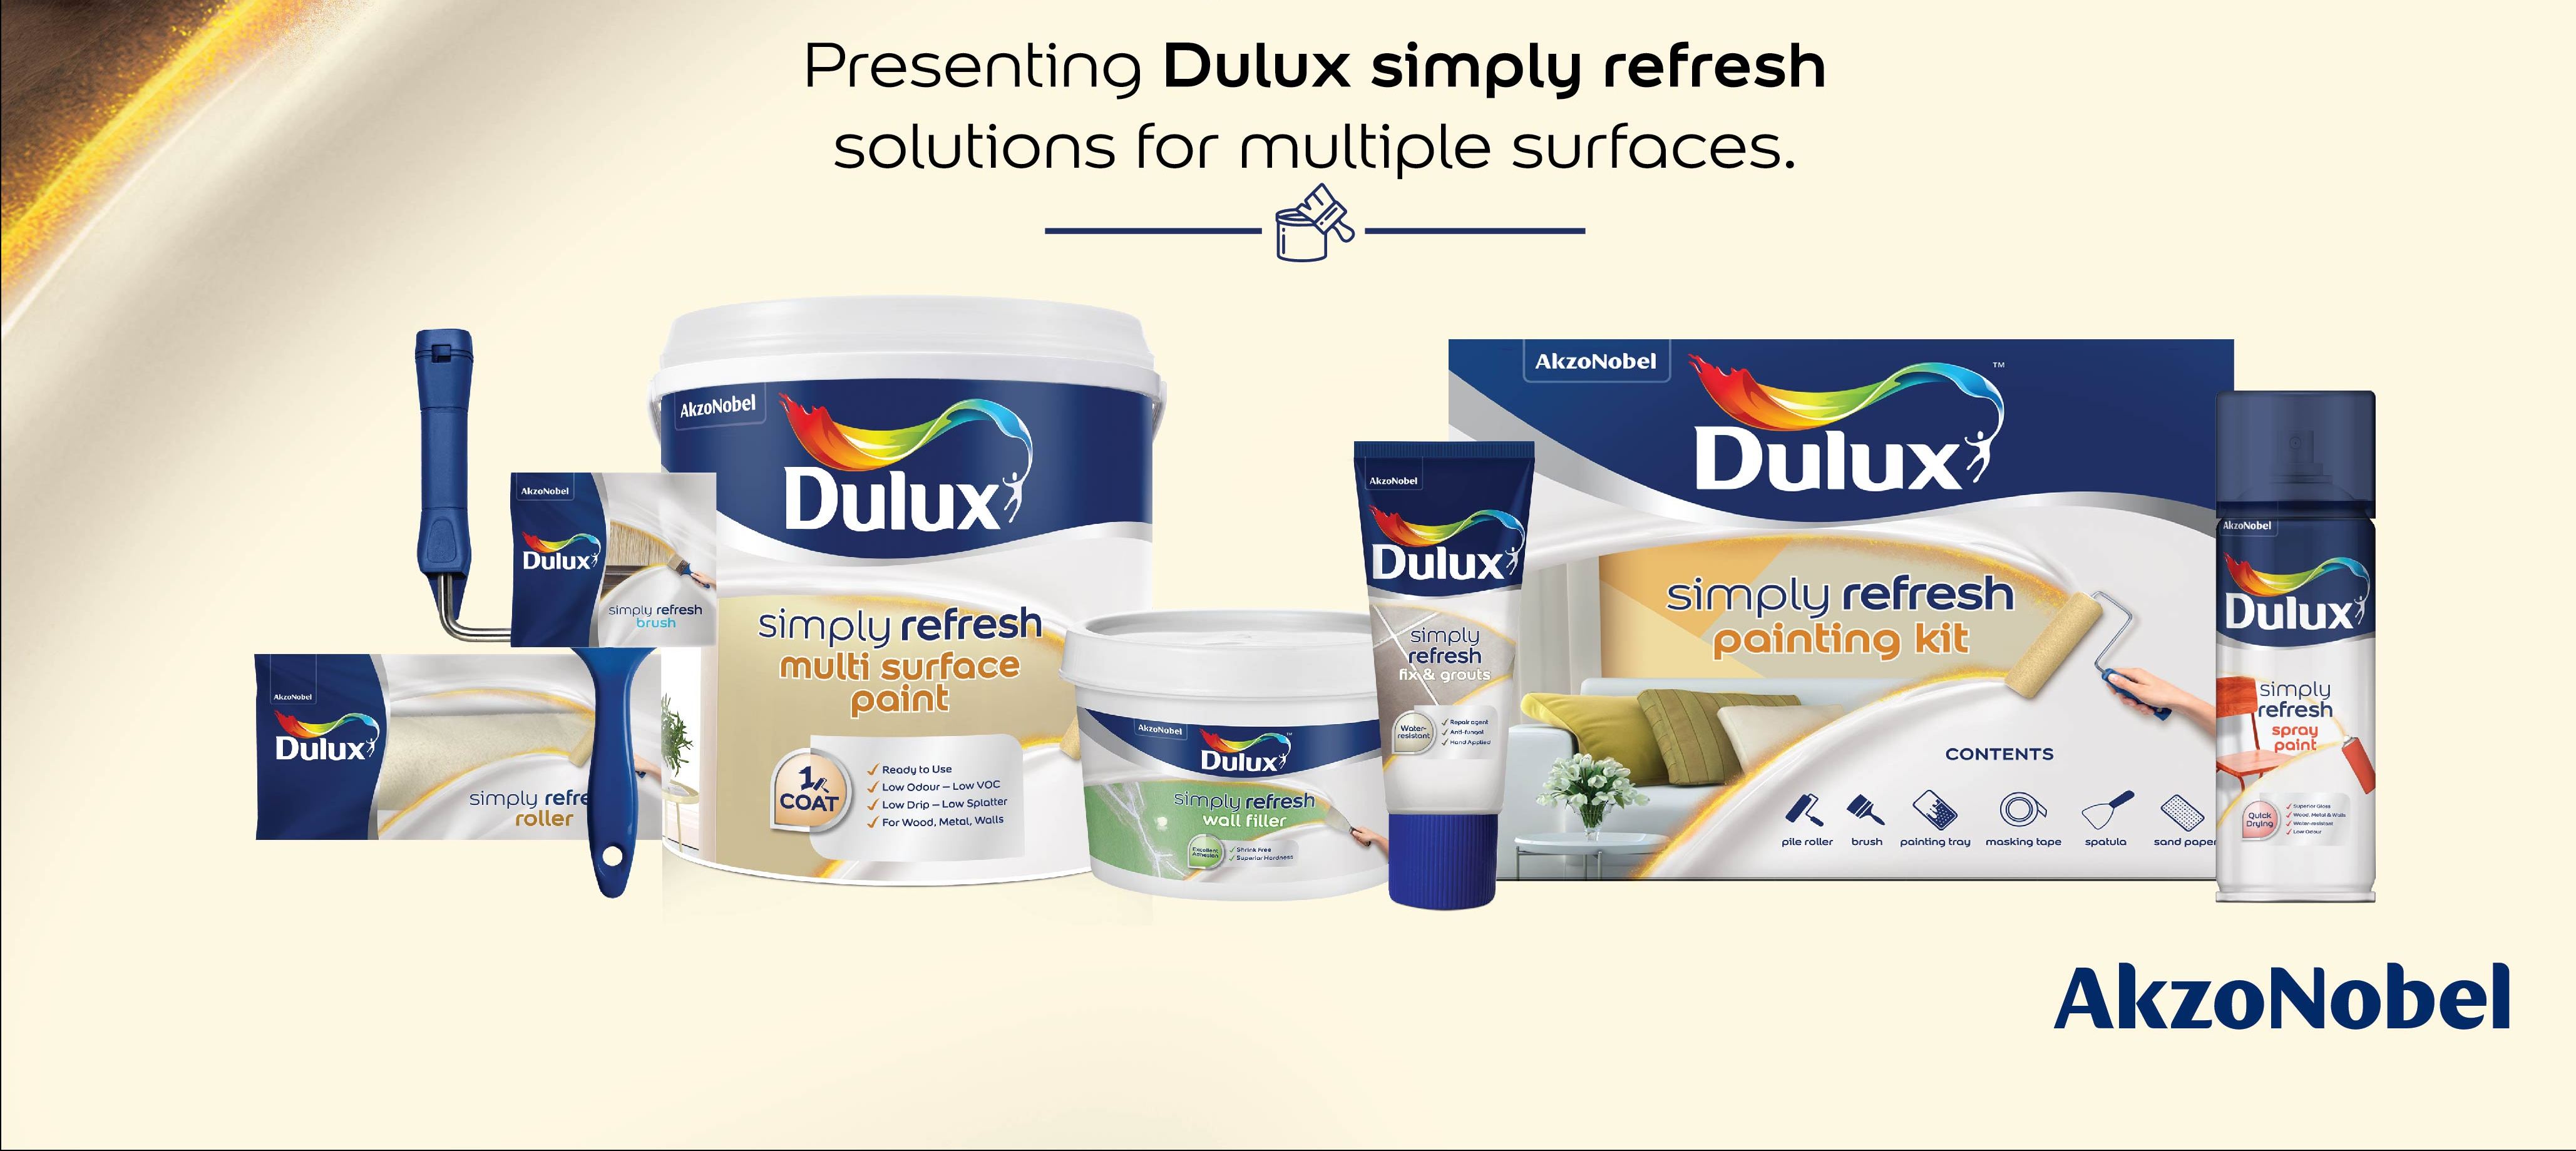 Akzonobel India Launches DIY Products for Multiple Surfaces